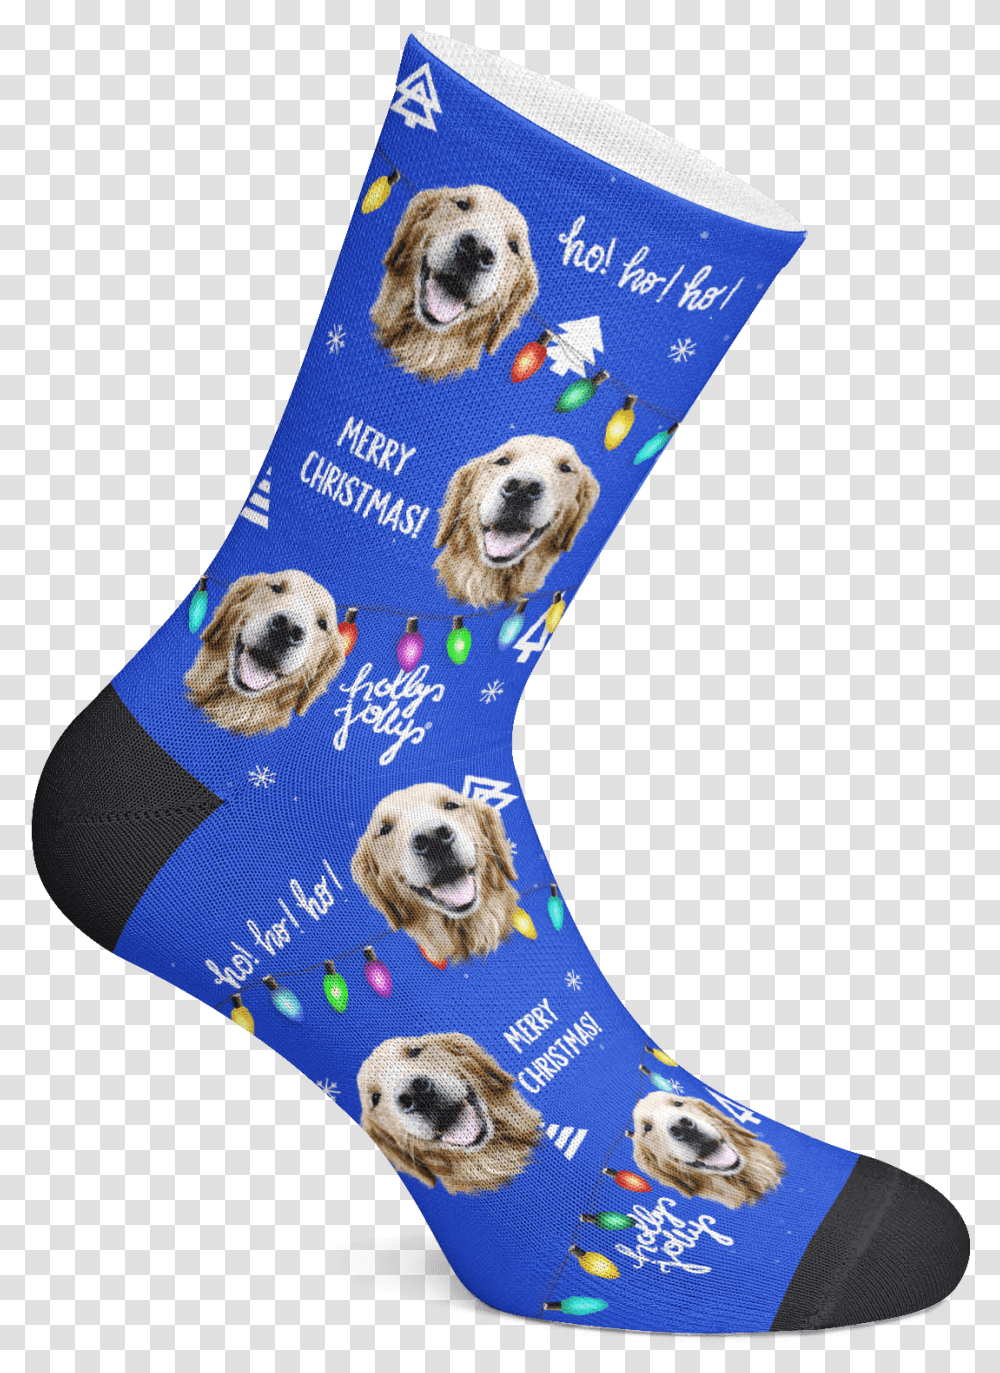 Puppy Christmaslights - Bff Wear Sock, Stocking, Christmas Stocking, Gift Transparent Png